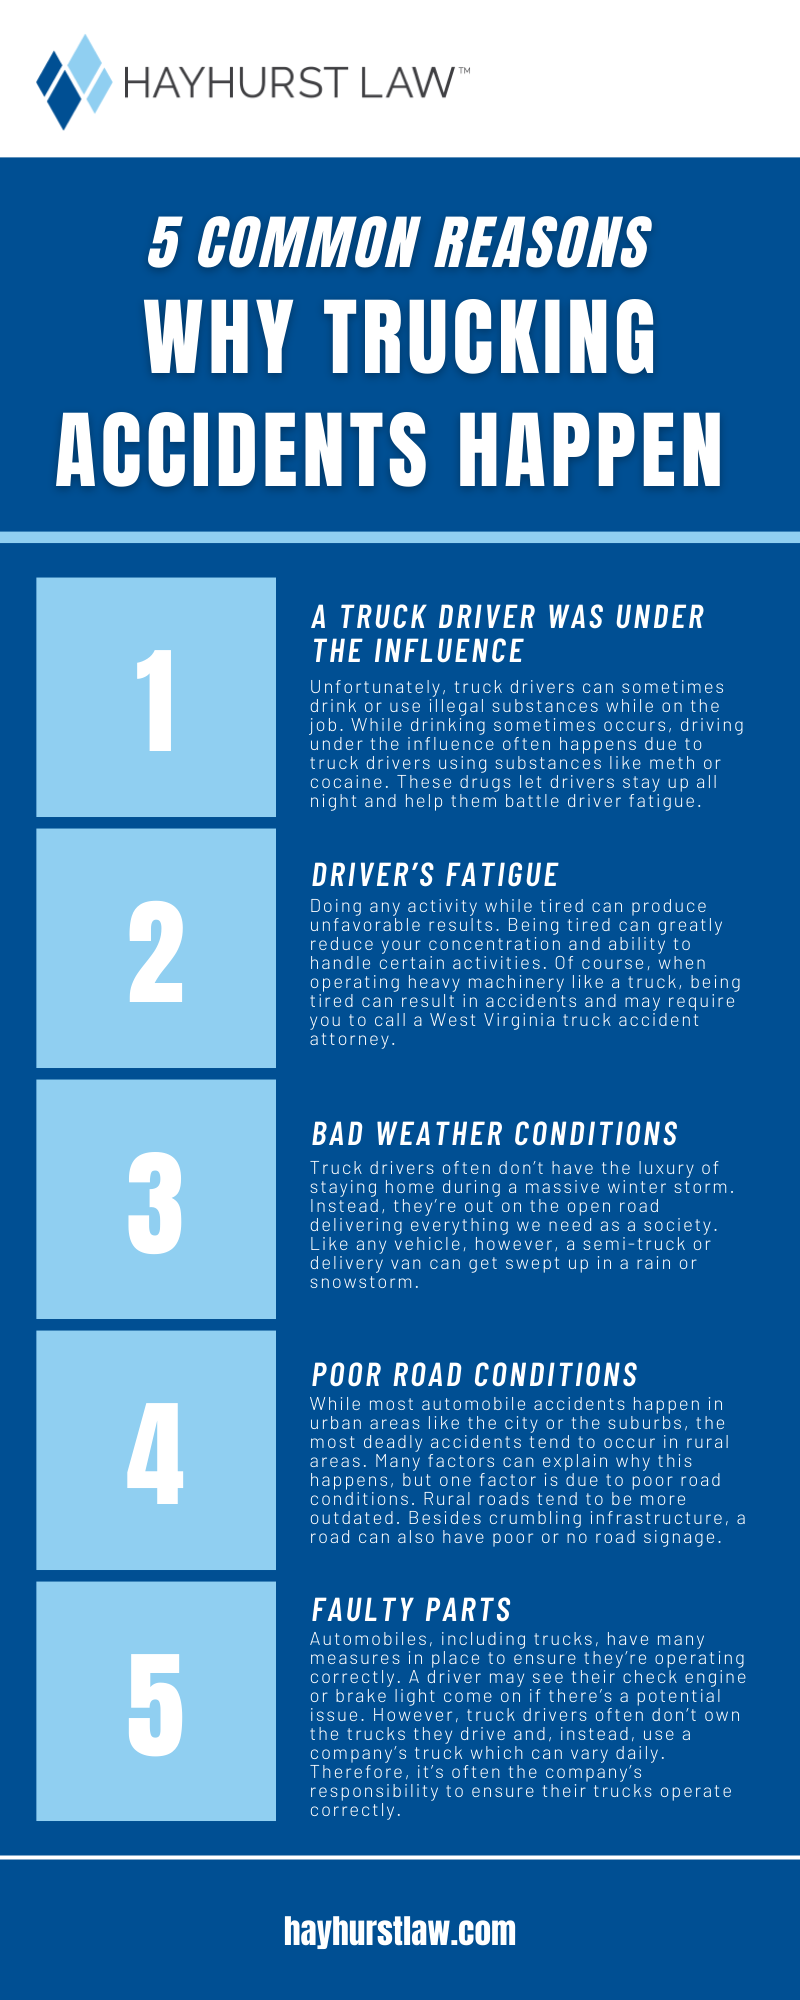 5 Common Reasons Why Trucking Accidents Happen Infographic